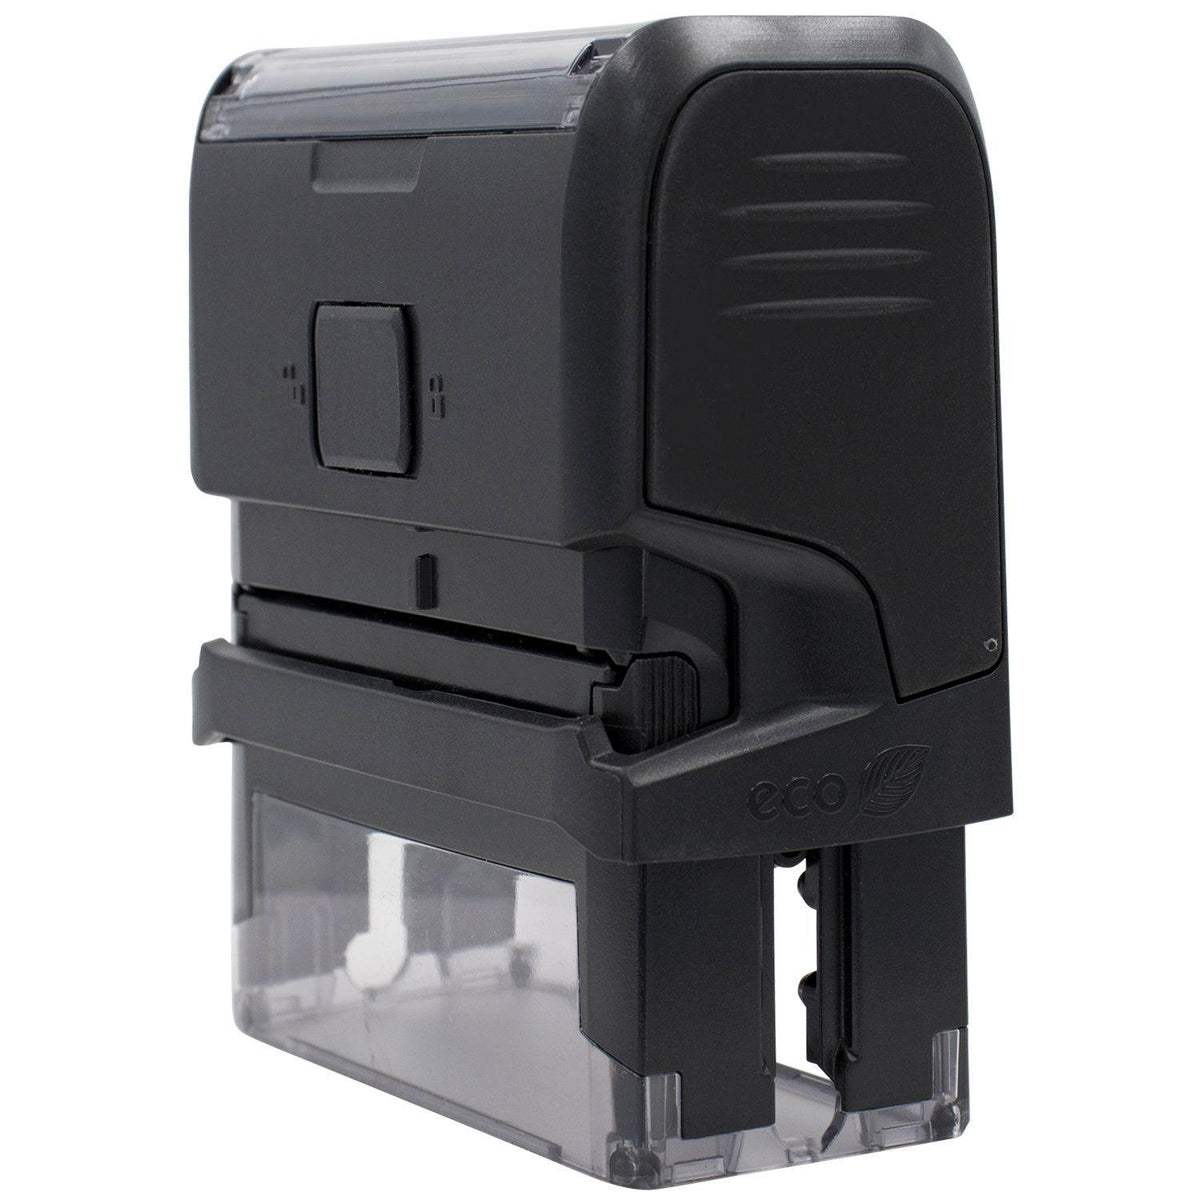 Self Inking Balanced Stamp - Engineer Seal Stamps - Brand_Trodat, Impression Size_Small, Stamp Type_Self-Inking Stamp, Type of Use_Finance